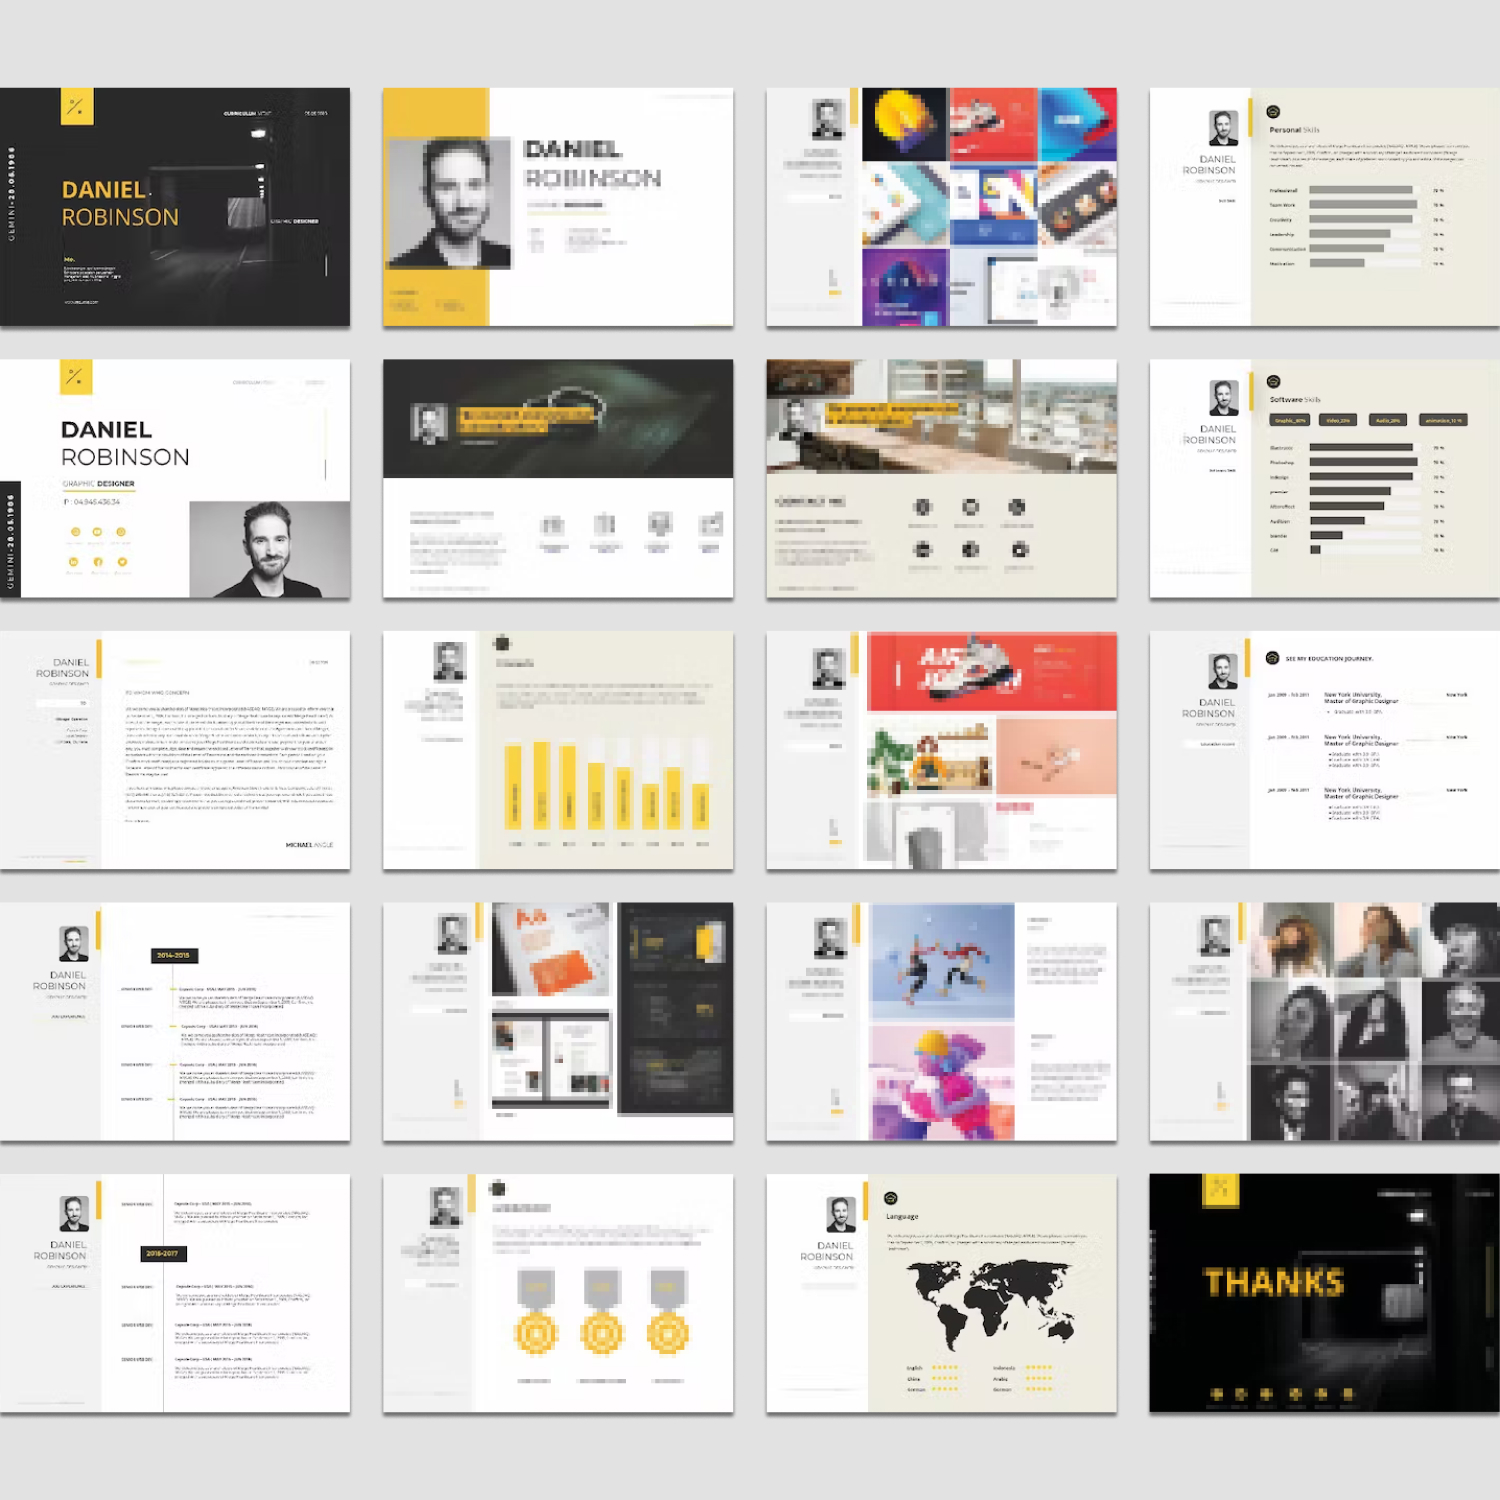 Preview resume presentation powerpoint.